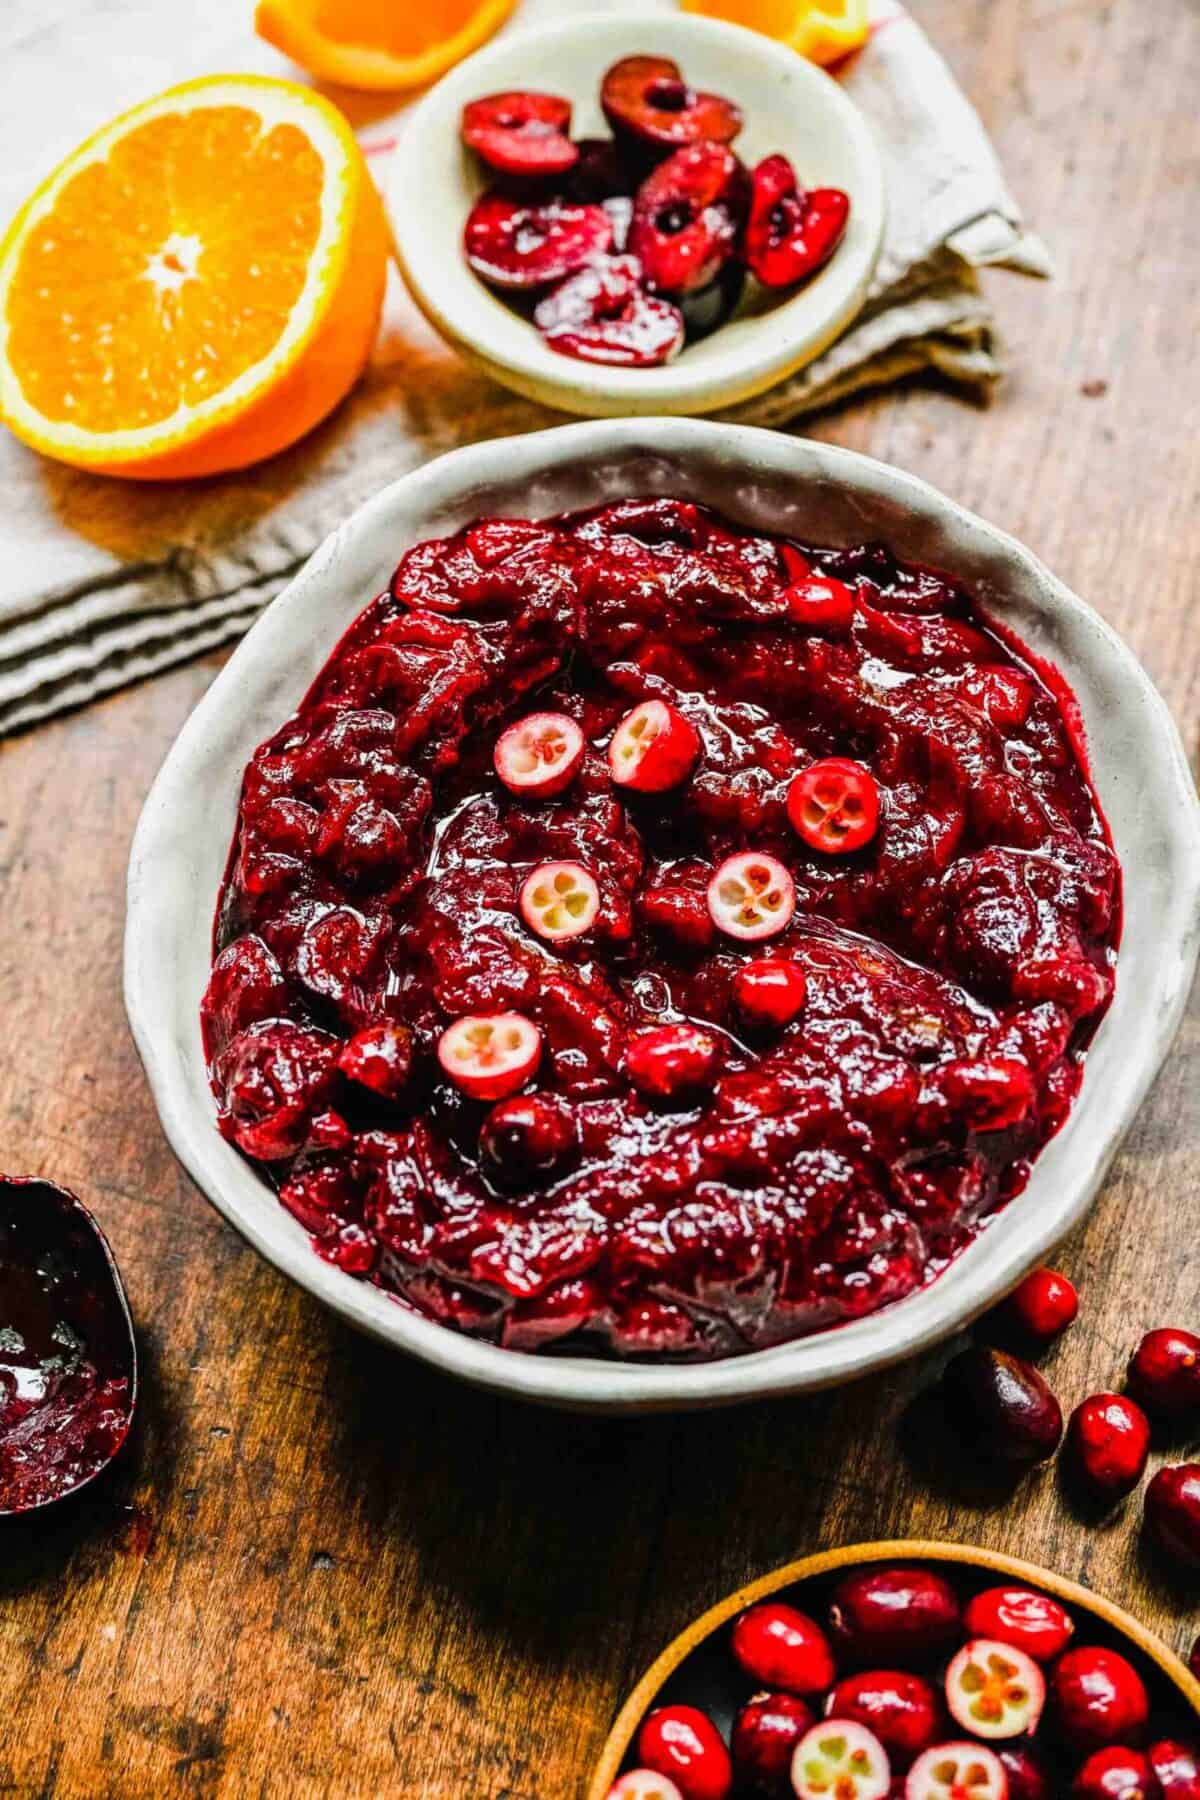 A bowl of cranberry cherry compote topped with sliced cranberries, next to half an orange, a bowl of cranberries, a bowl of cherries, and a dirty spoon